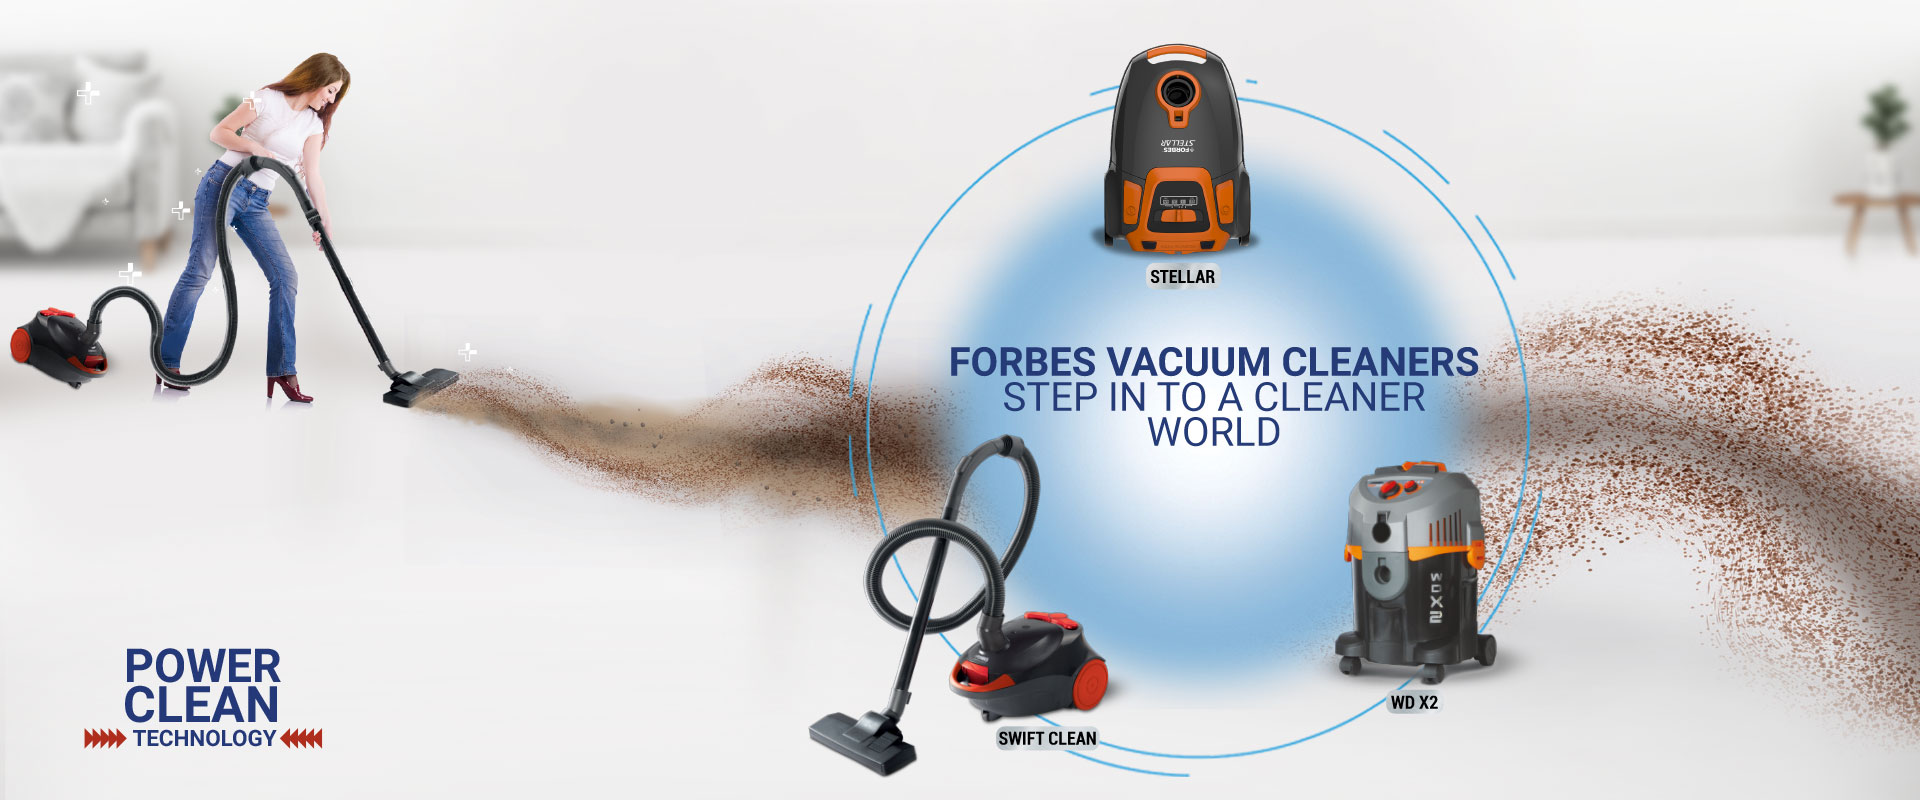 FORBES VACUUM CLEANERS. STEP IN TO A CLEANER WORLD.